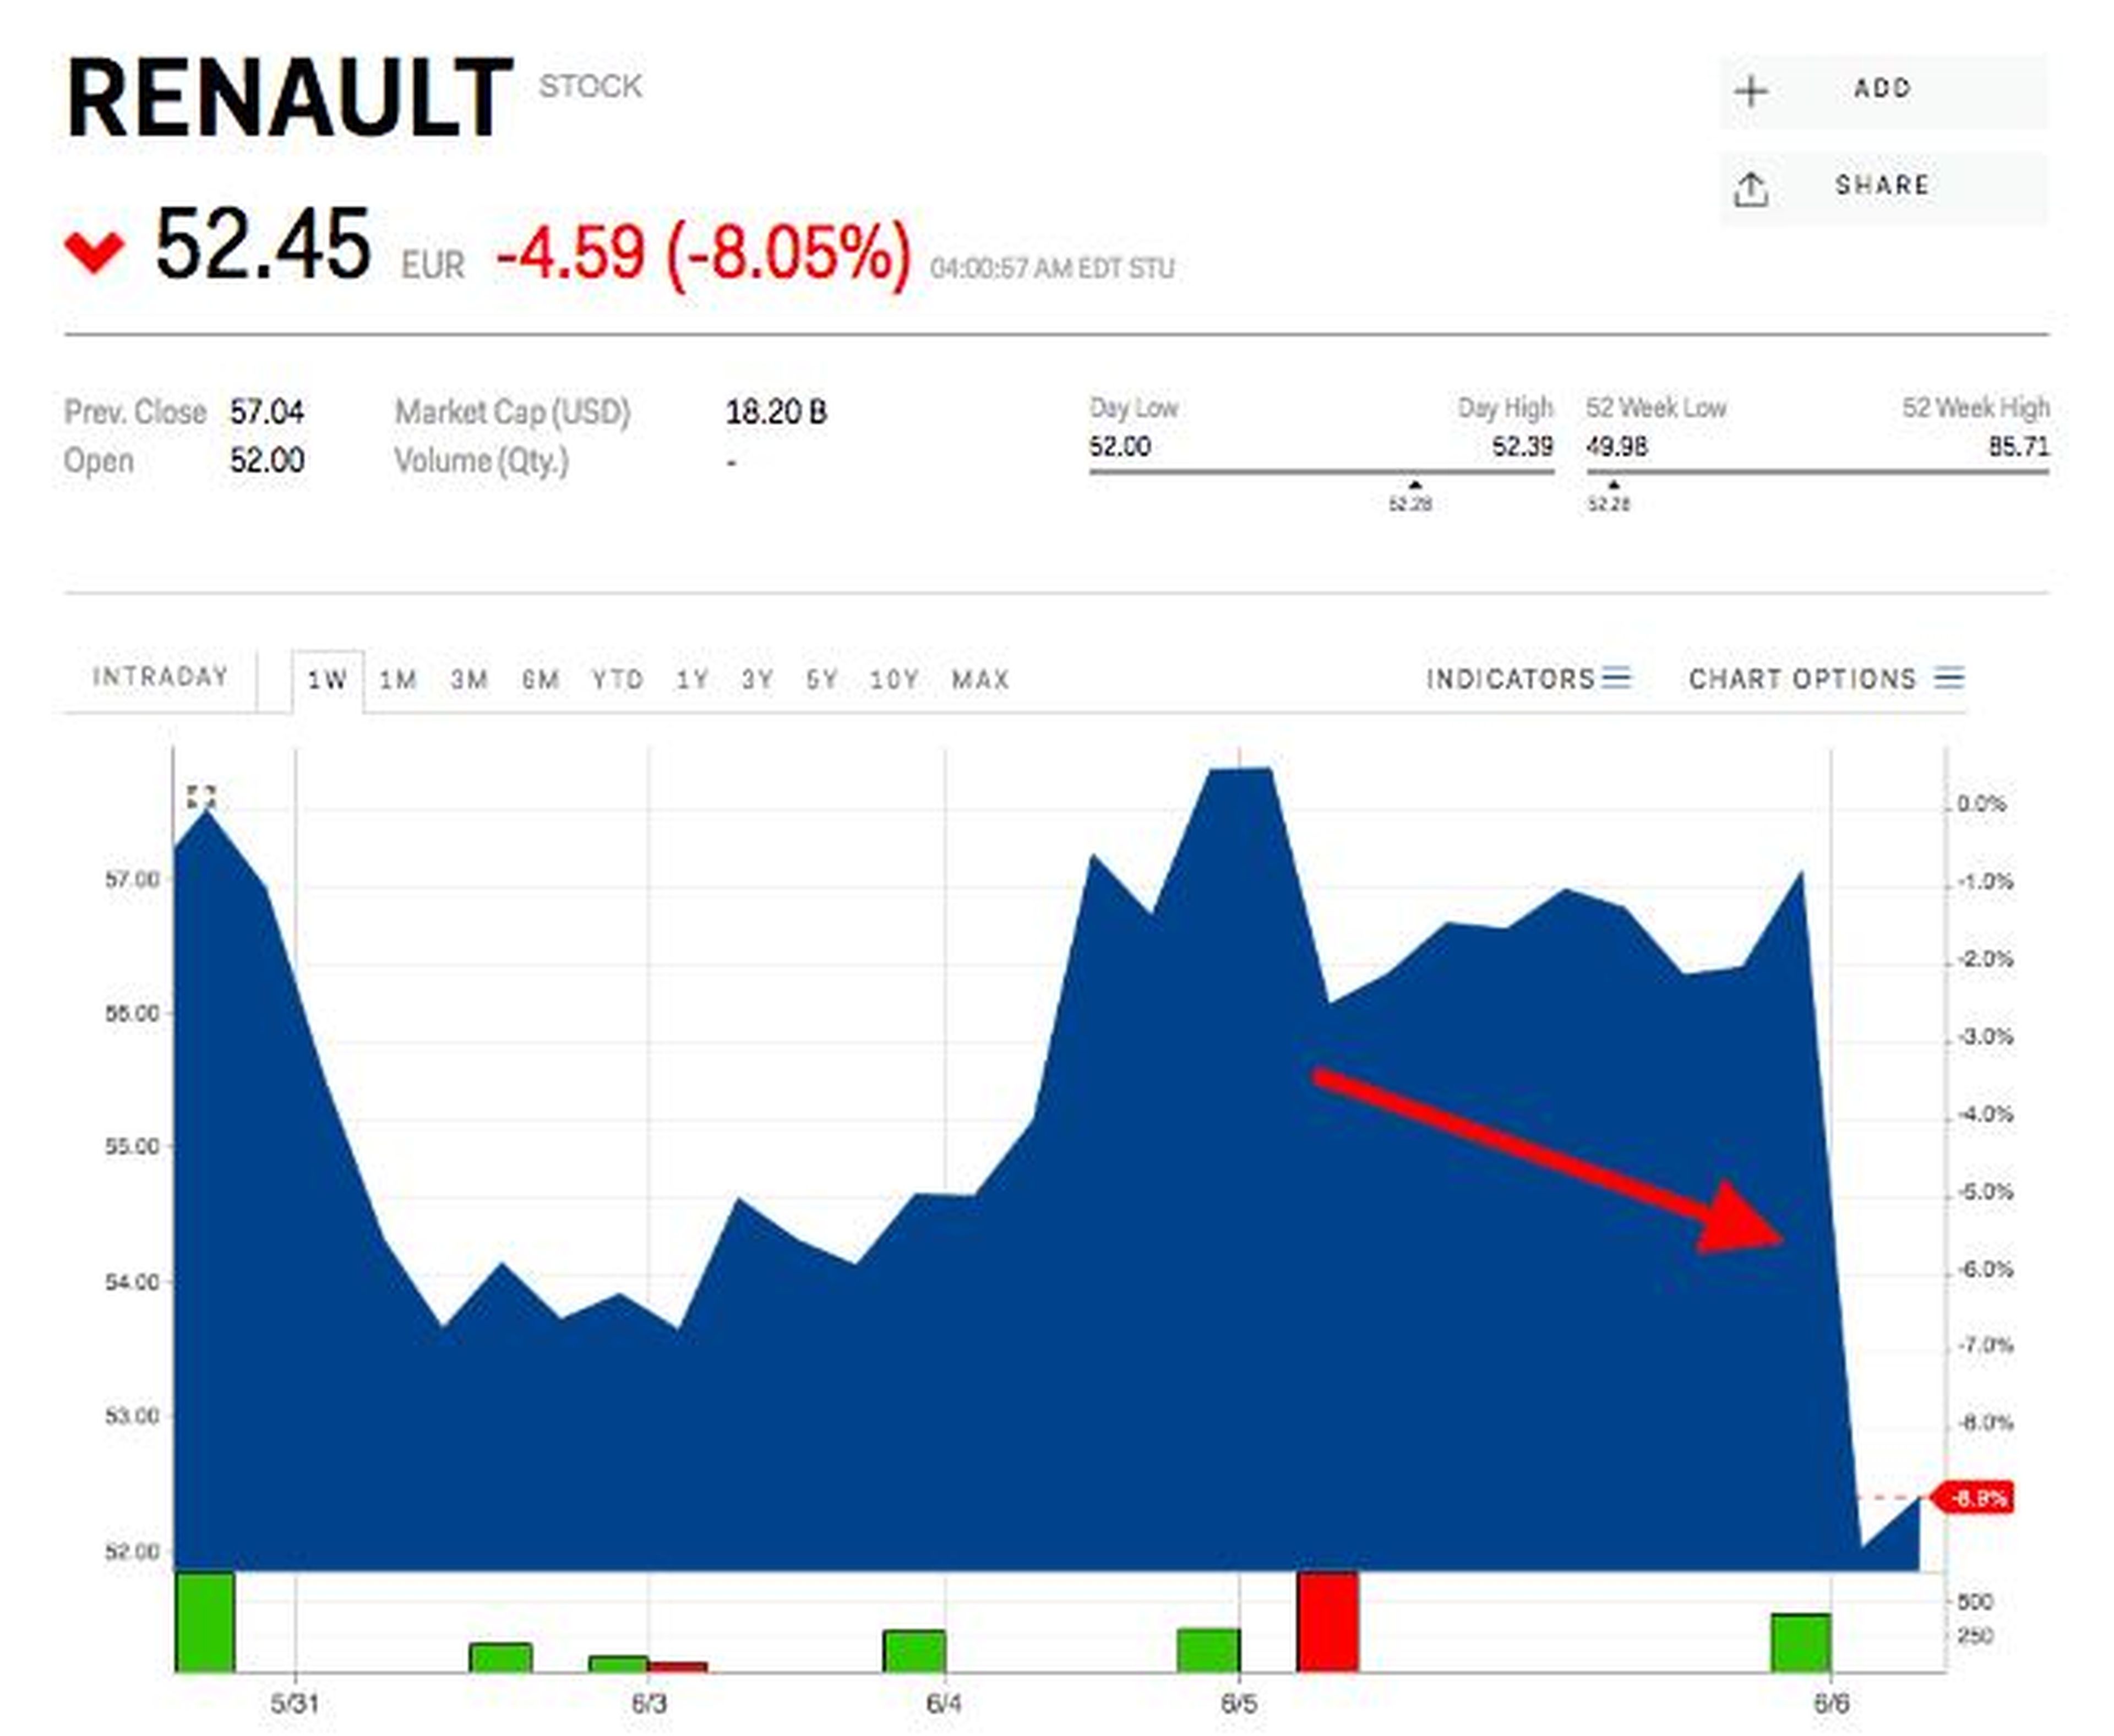 Renault shares are tanking after Fiat Chrysler scrapped their mega-merger